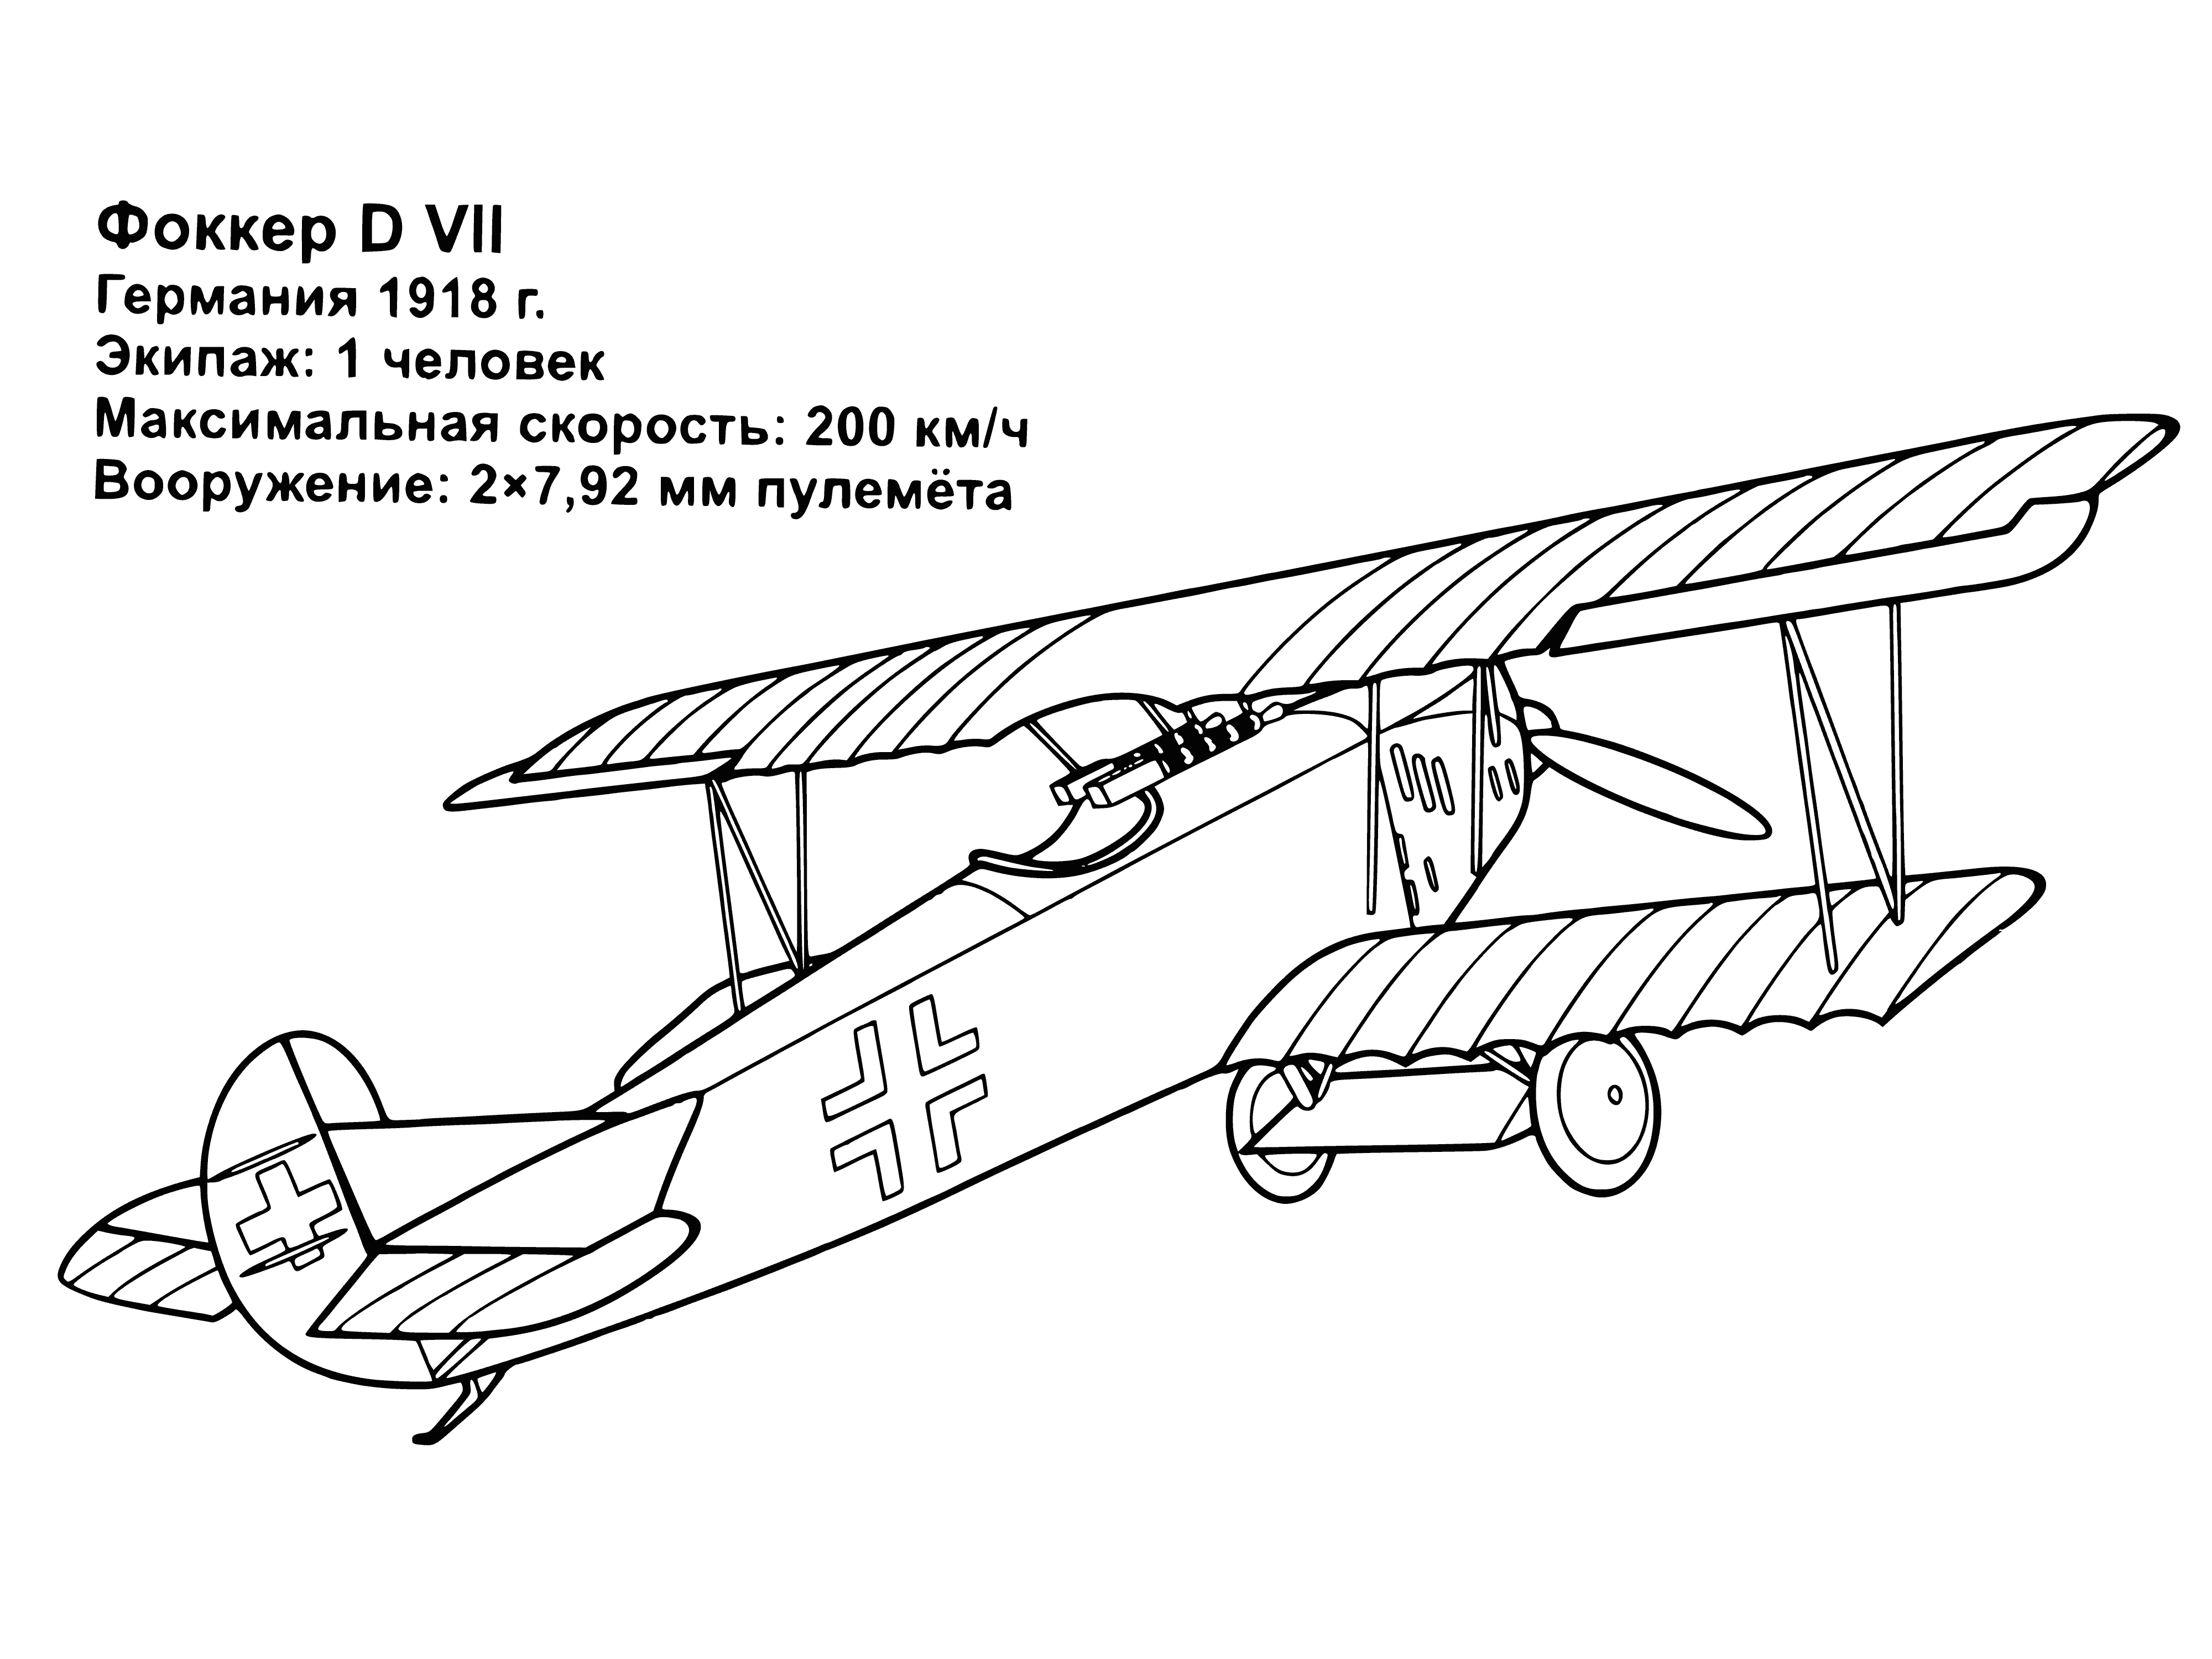 German aircraft of 1918 coloring page